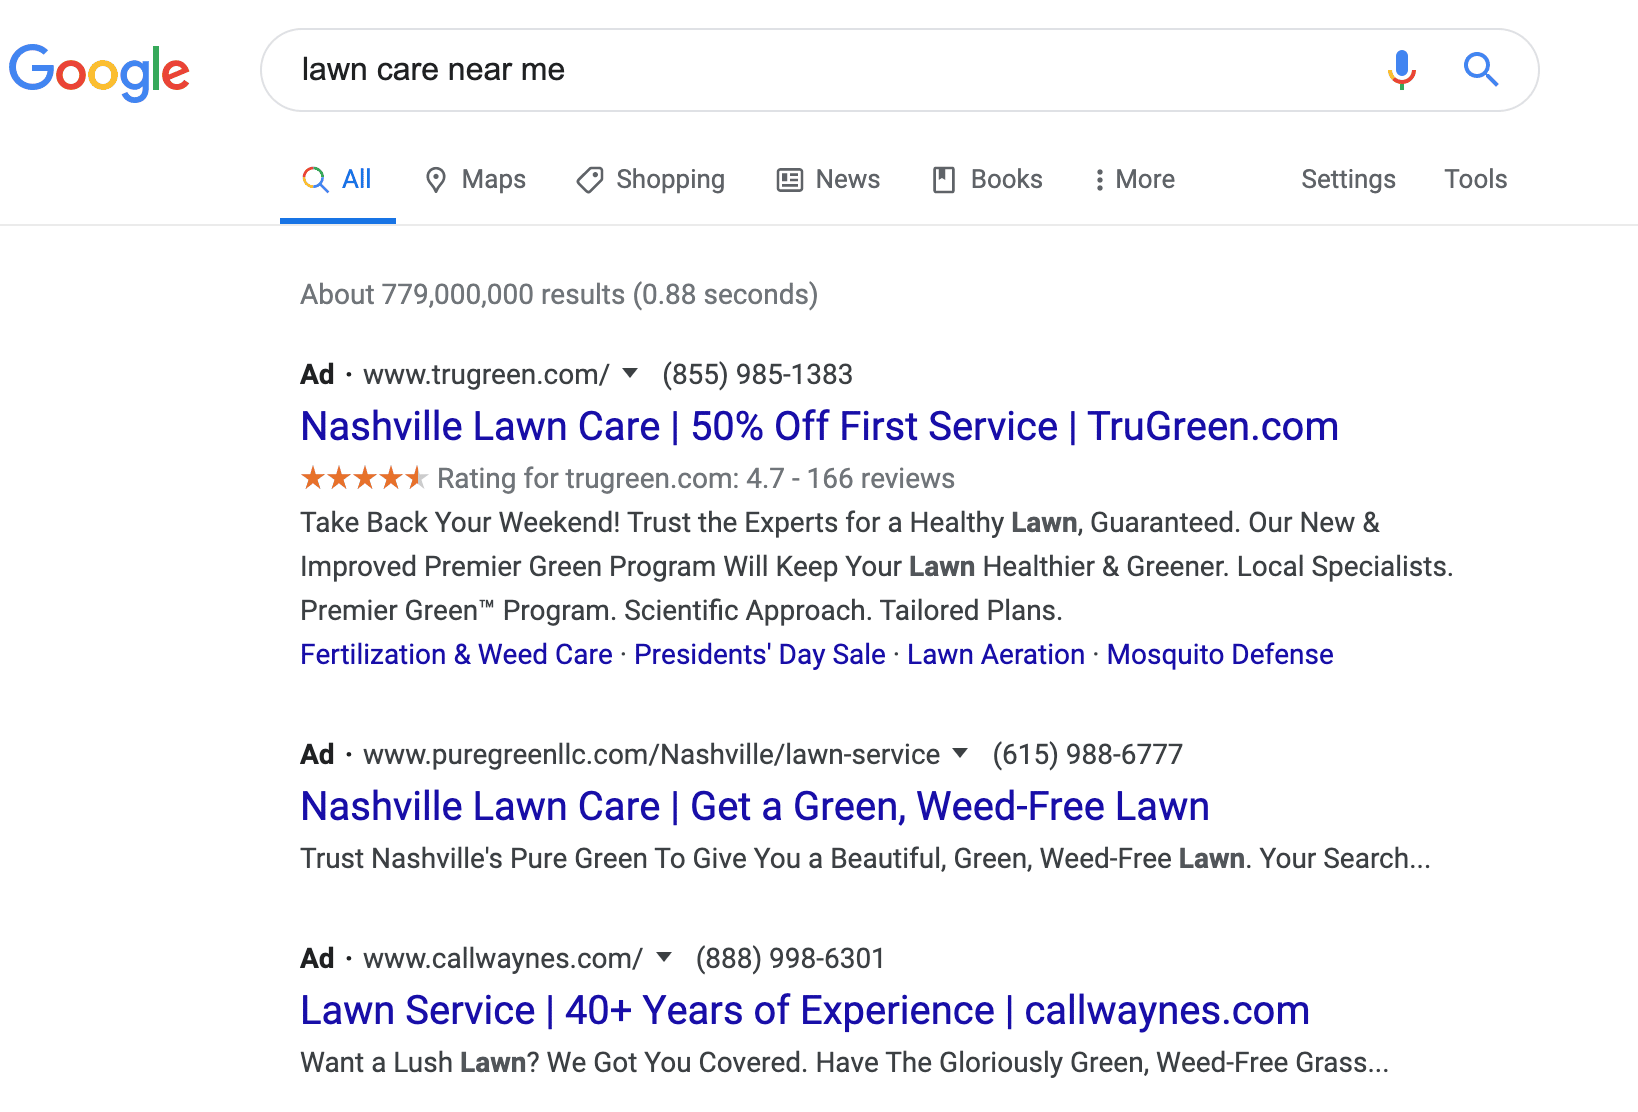 Local Search Result for "Lawn Care Near Me"